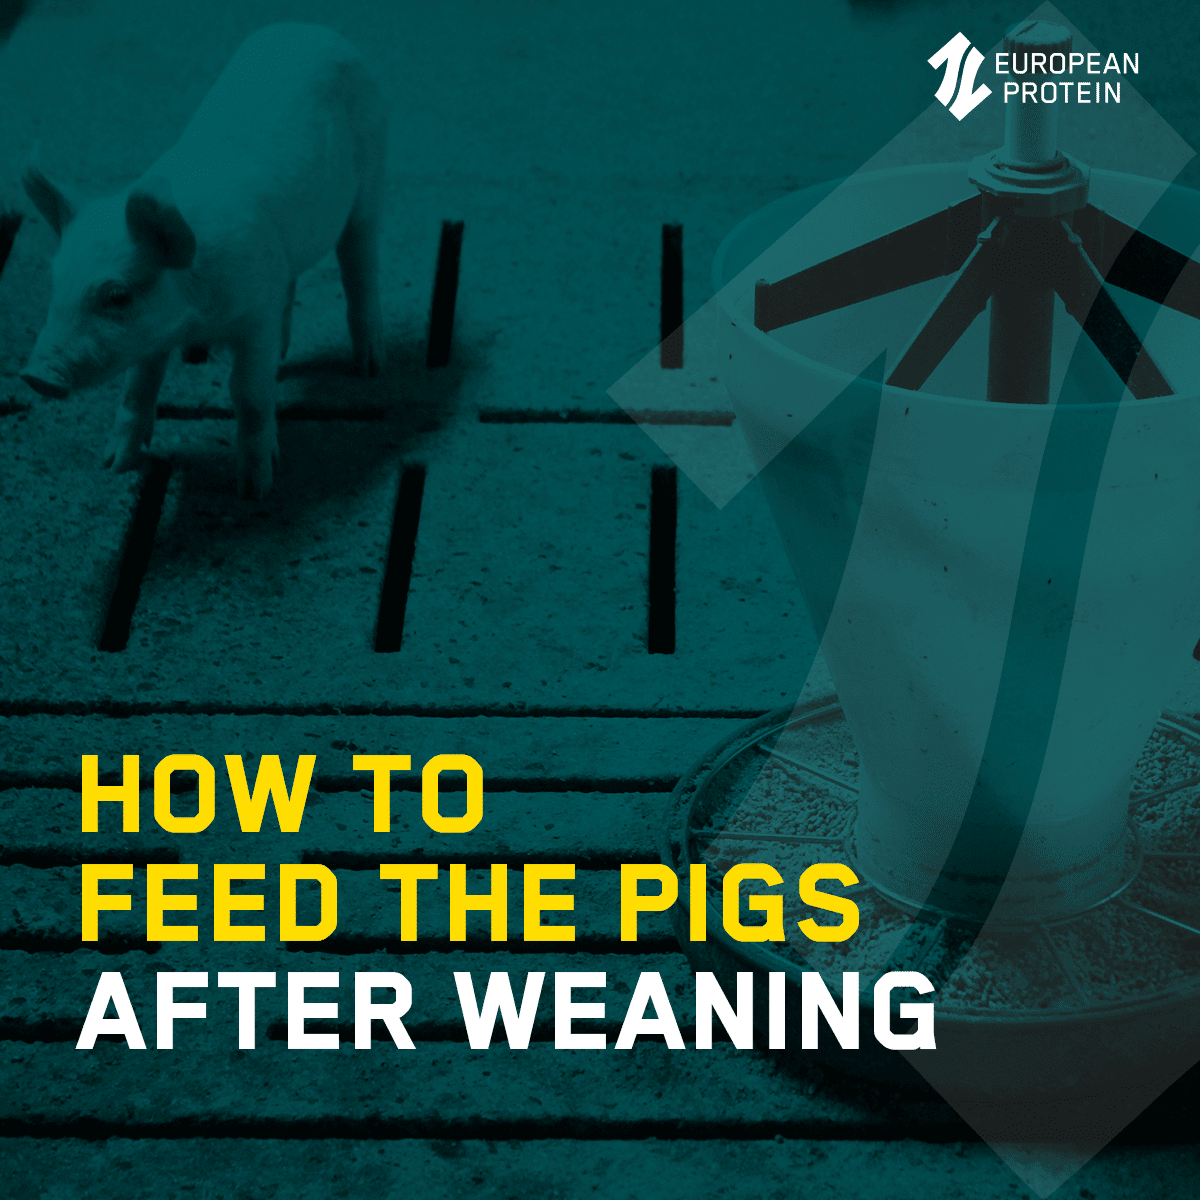 How to feed the pigs after weaning